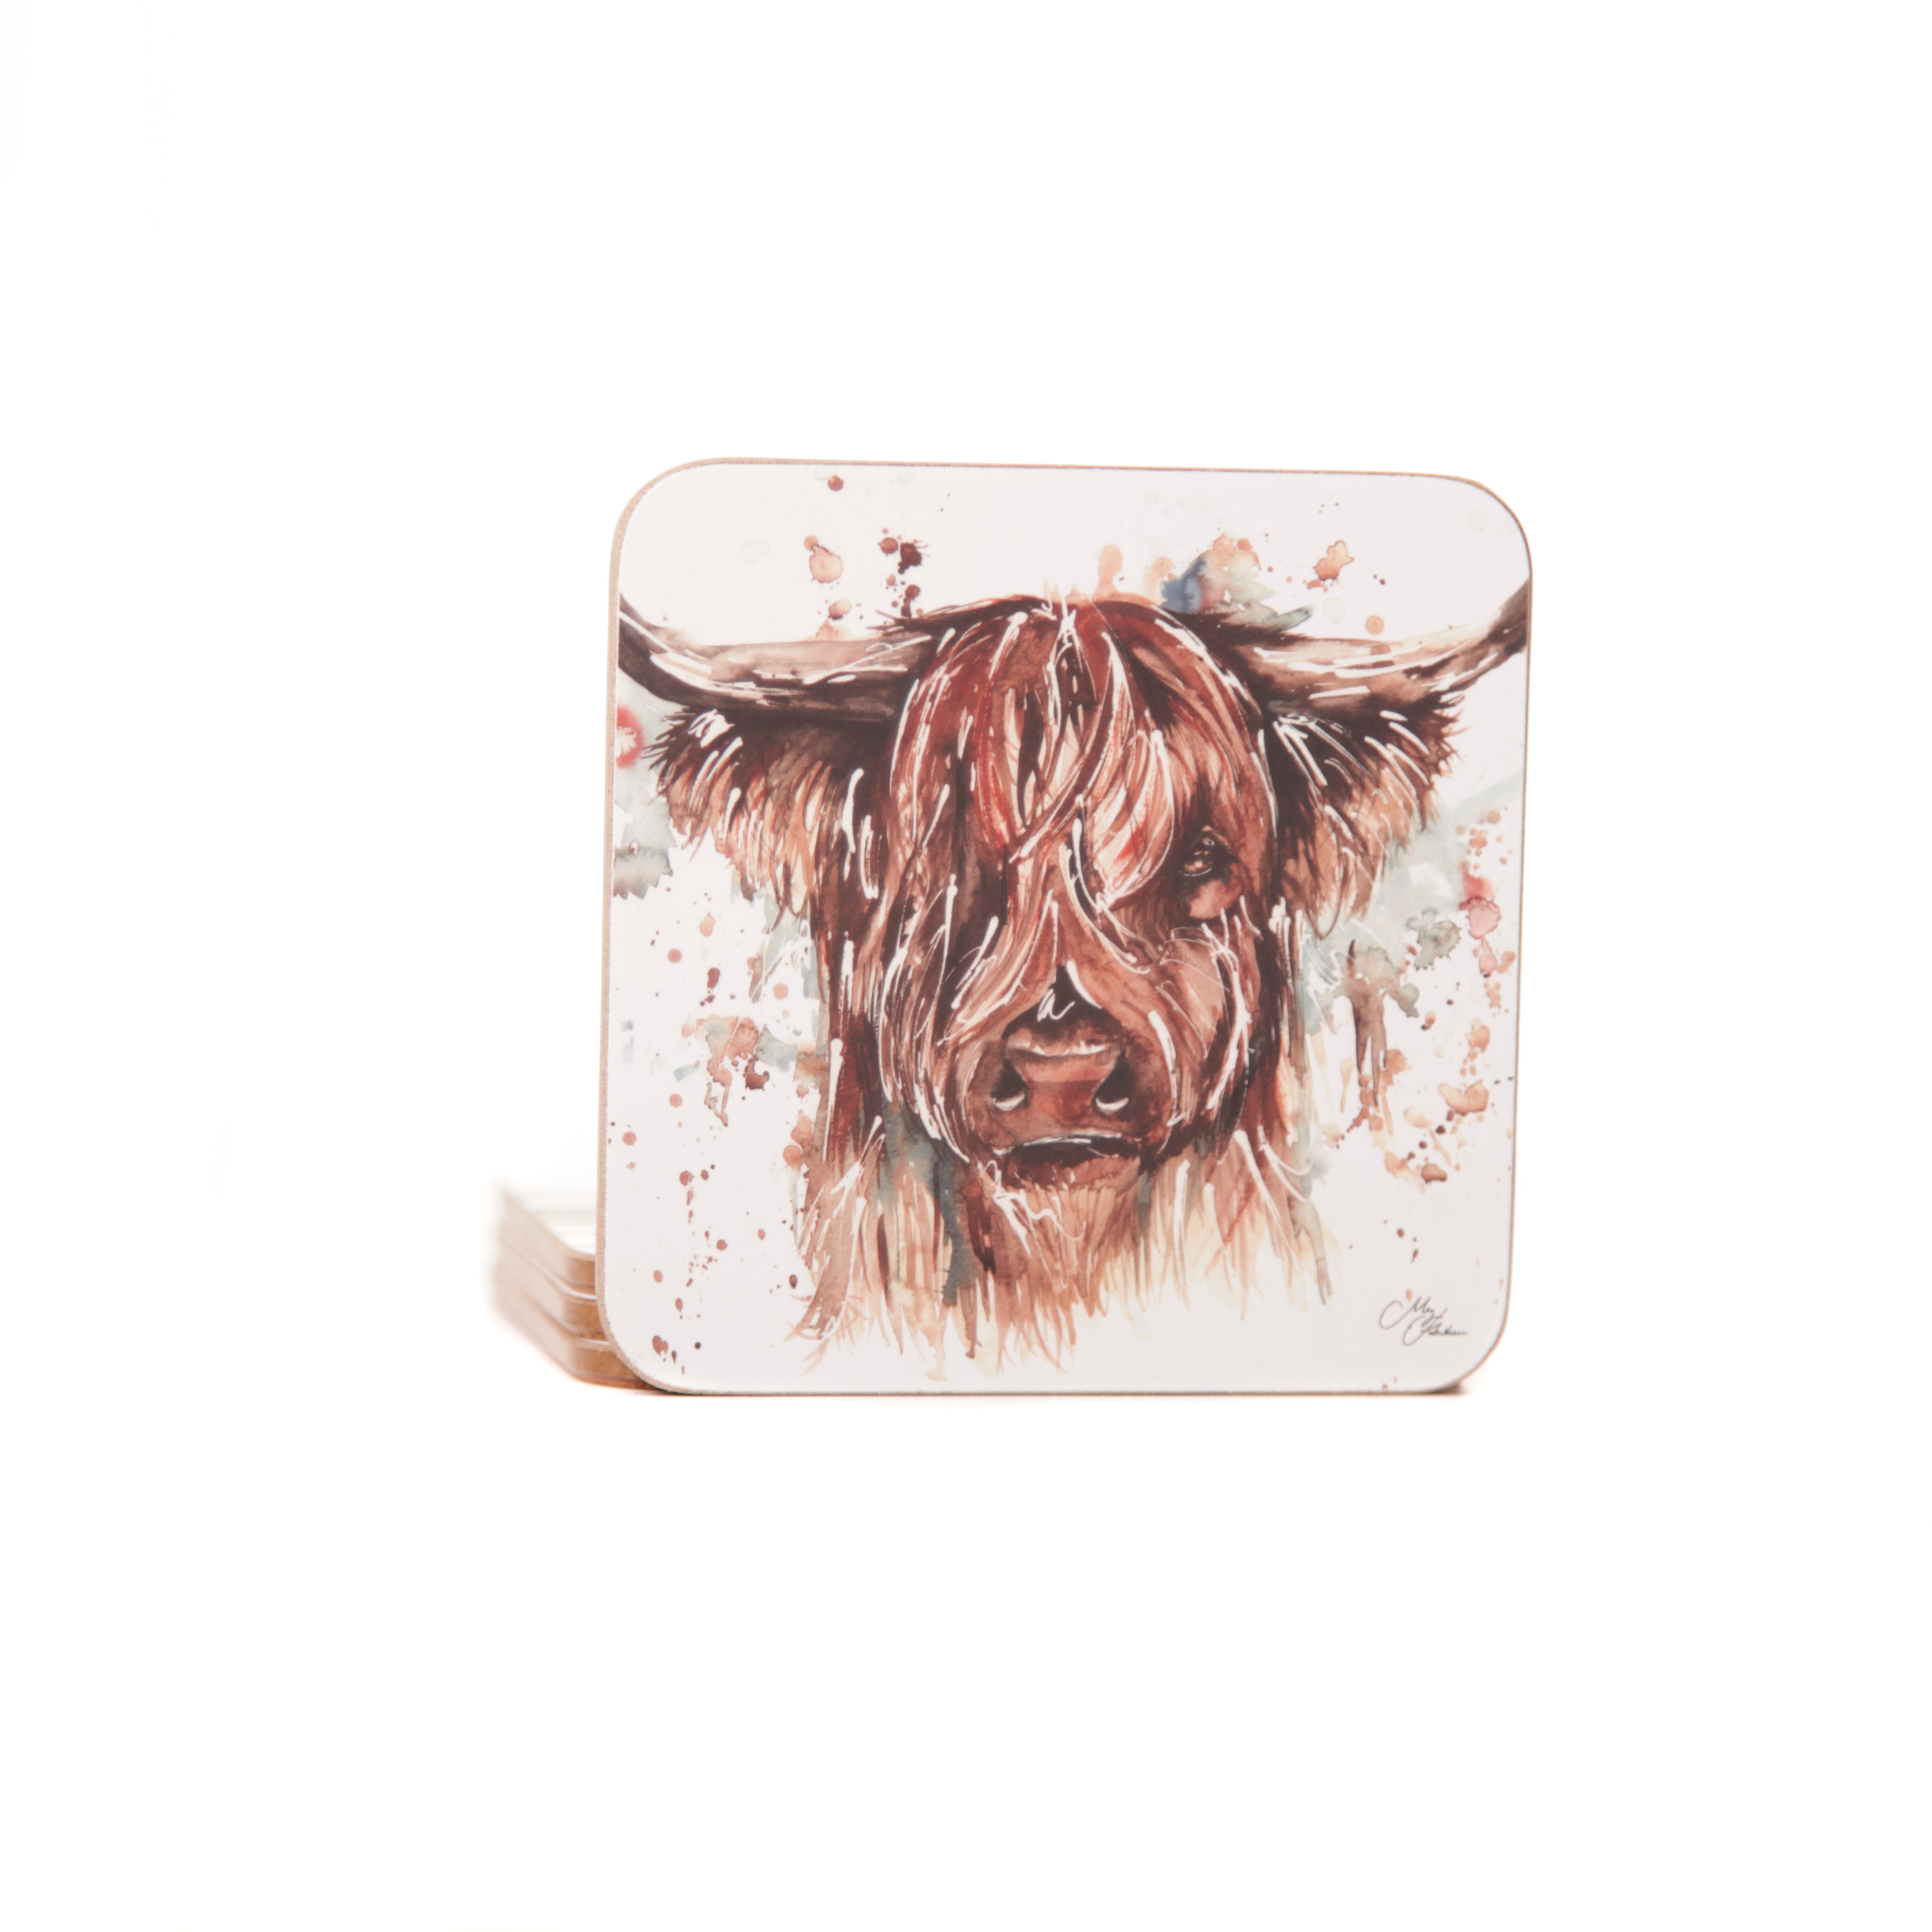 'The Hebrides' Highland Cow Watercolour Design Coasters set of 4